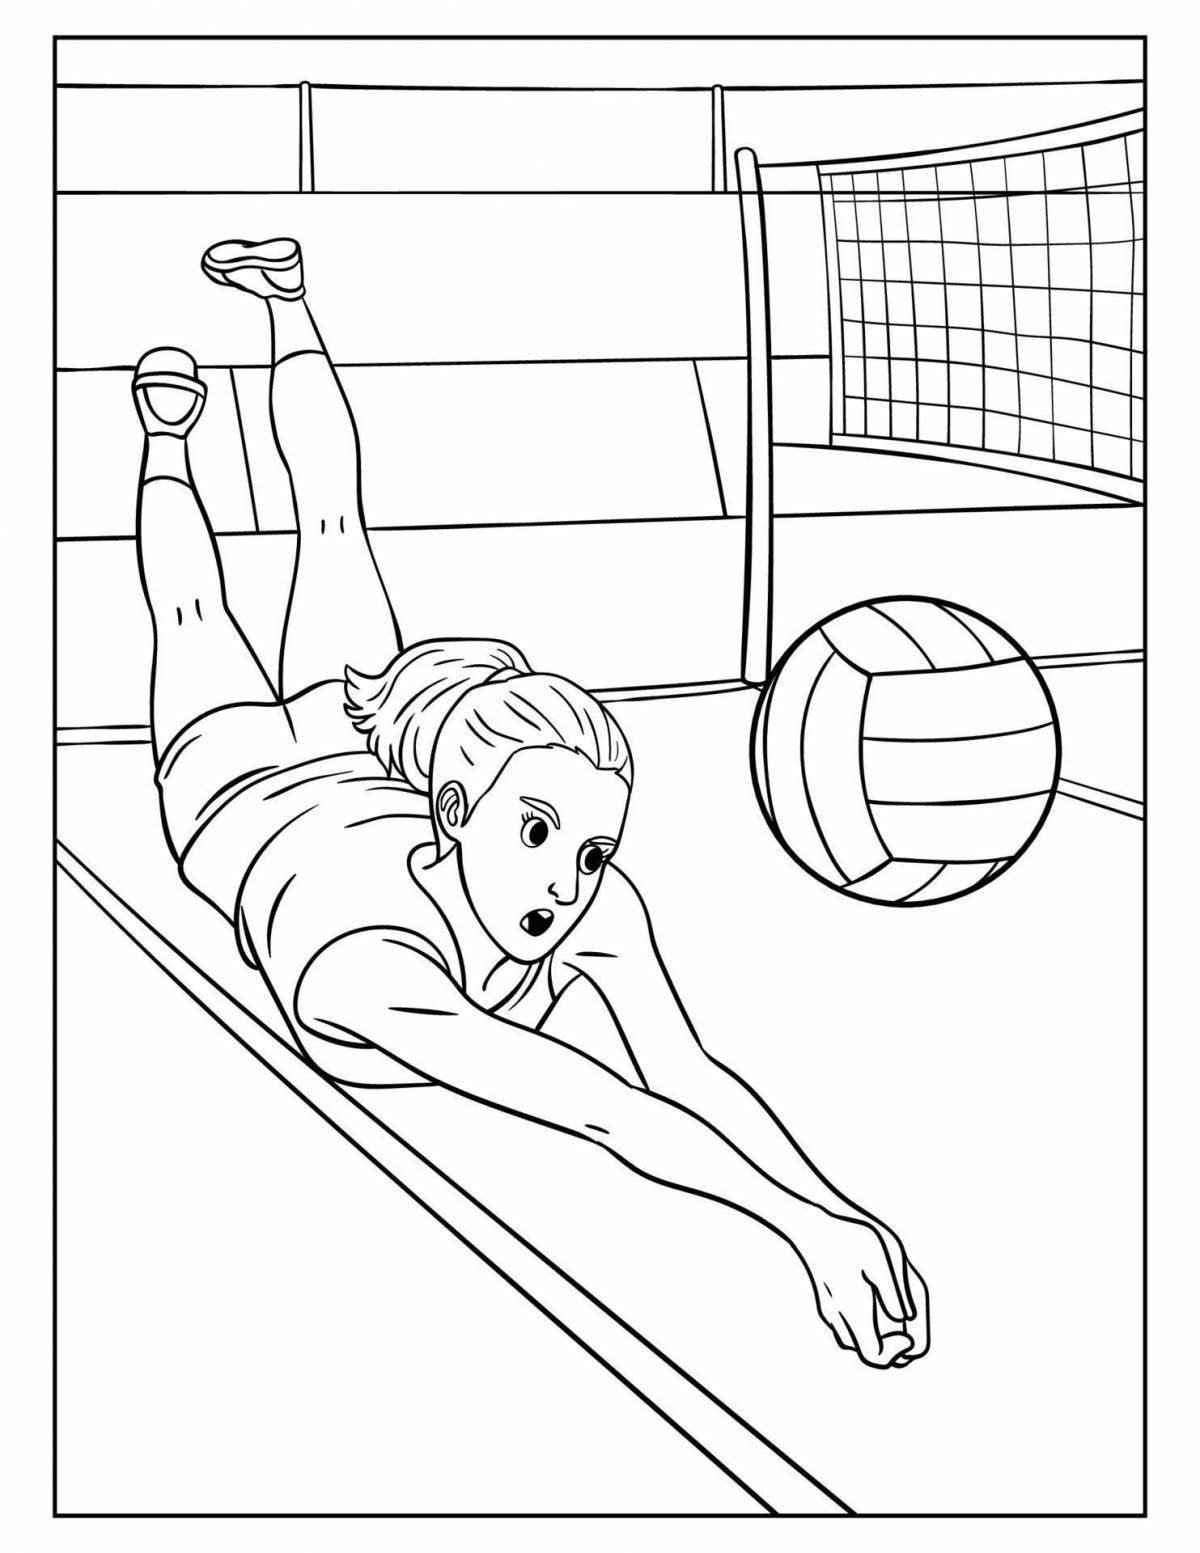 Colourful volleyball coloring book for youth